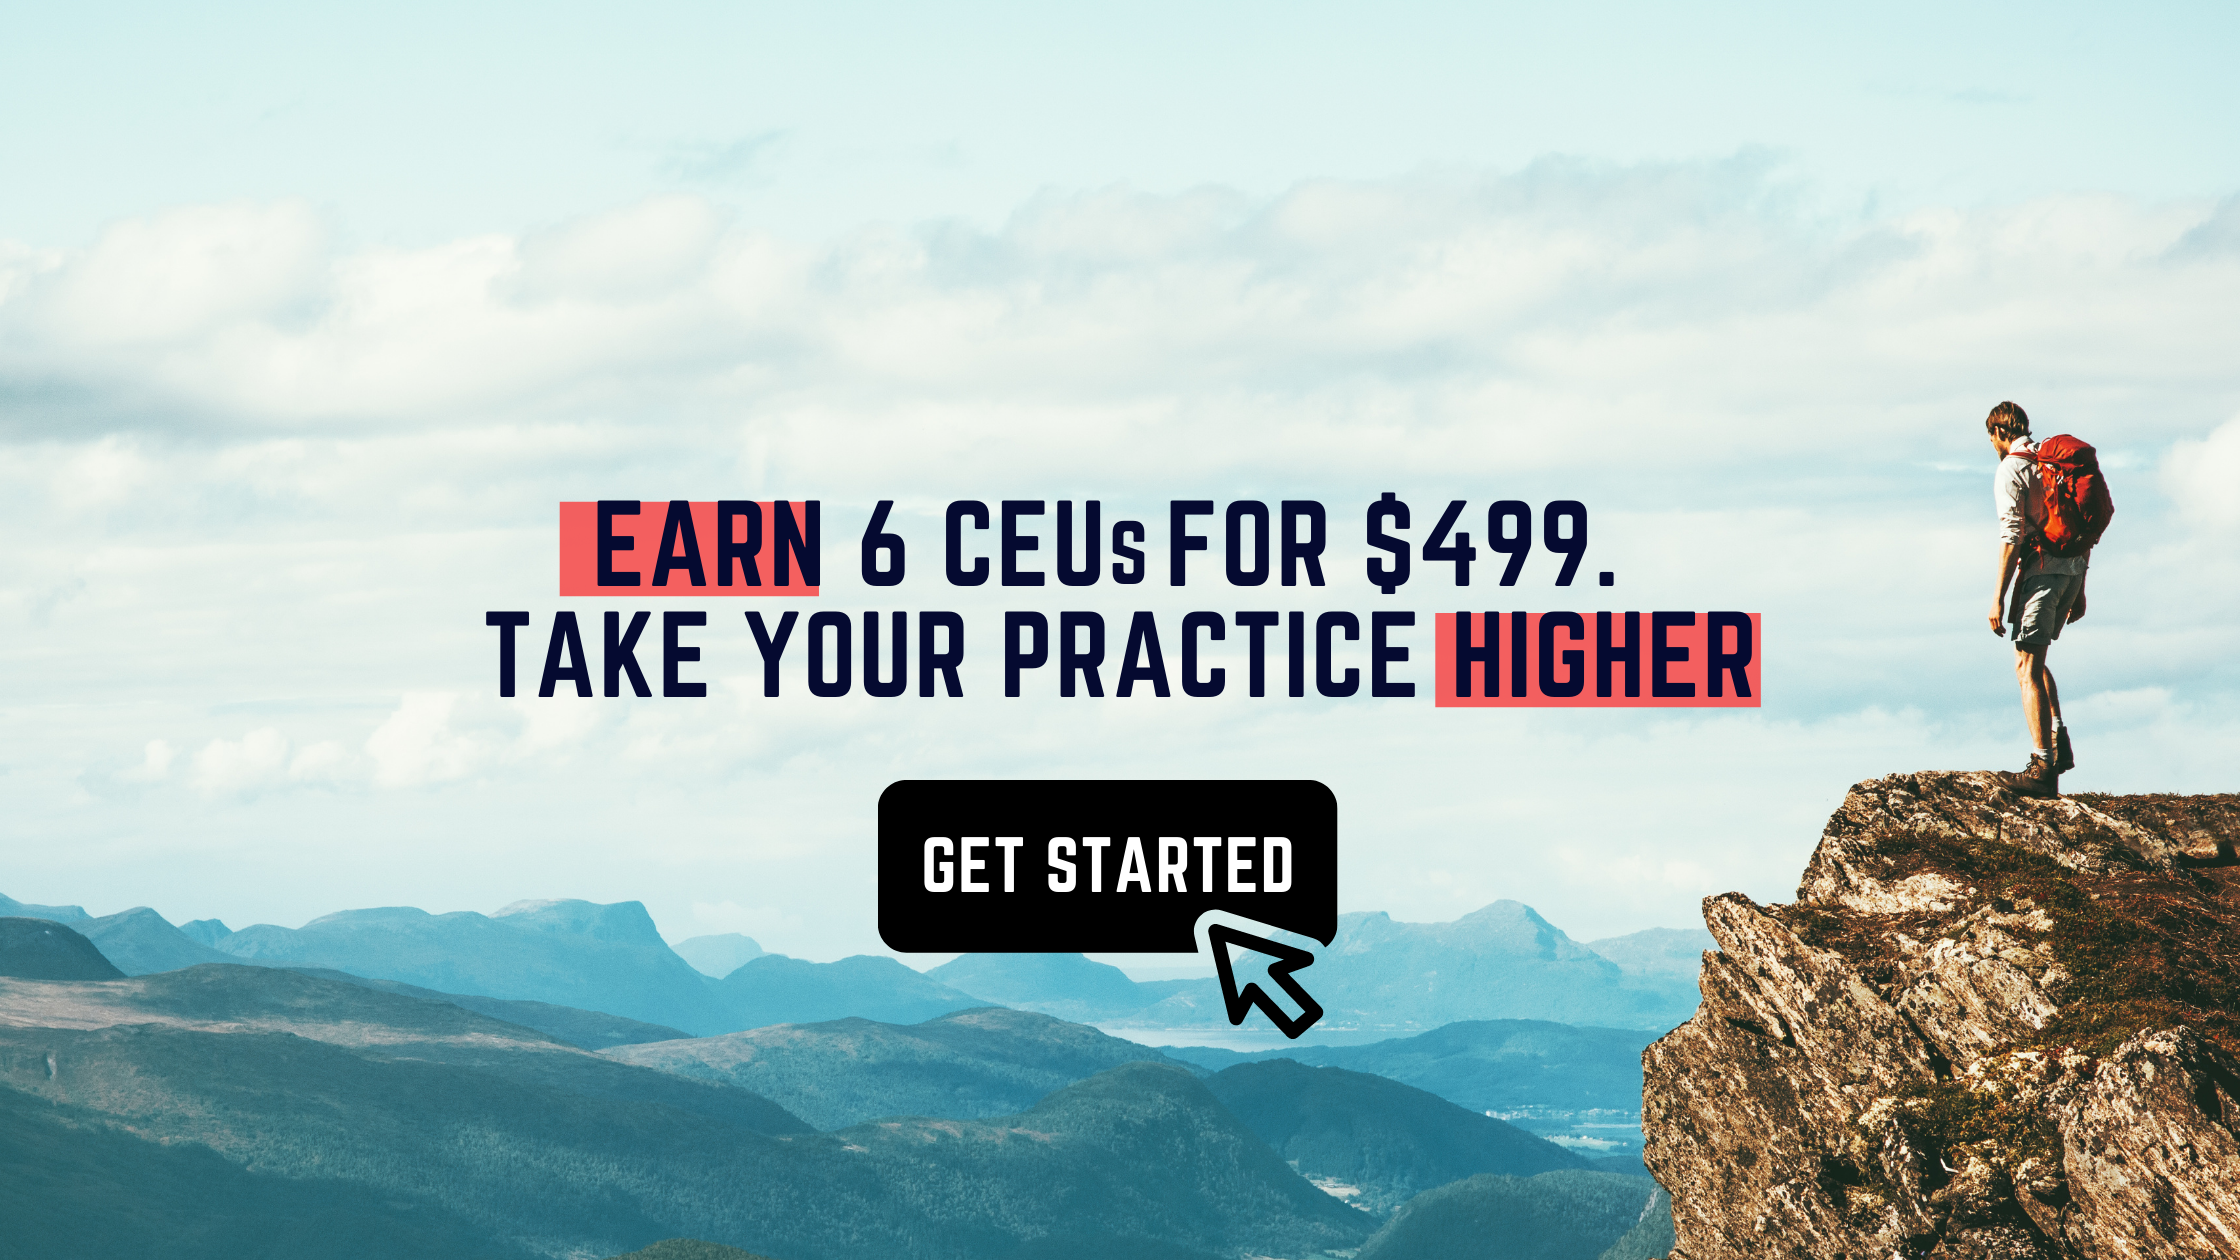 Earn 6 CEUs for Private Practice